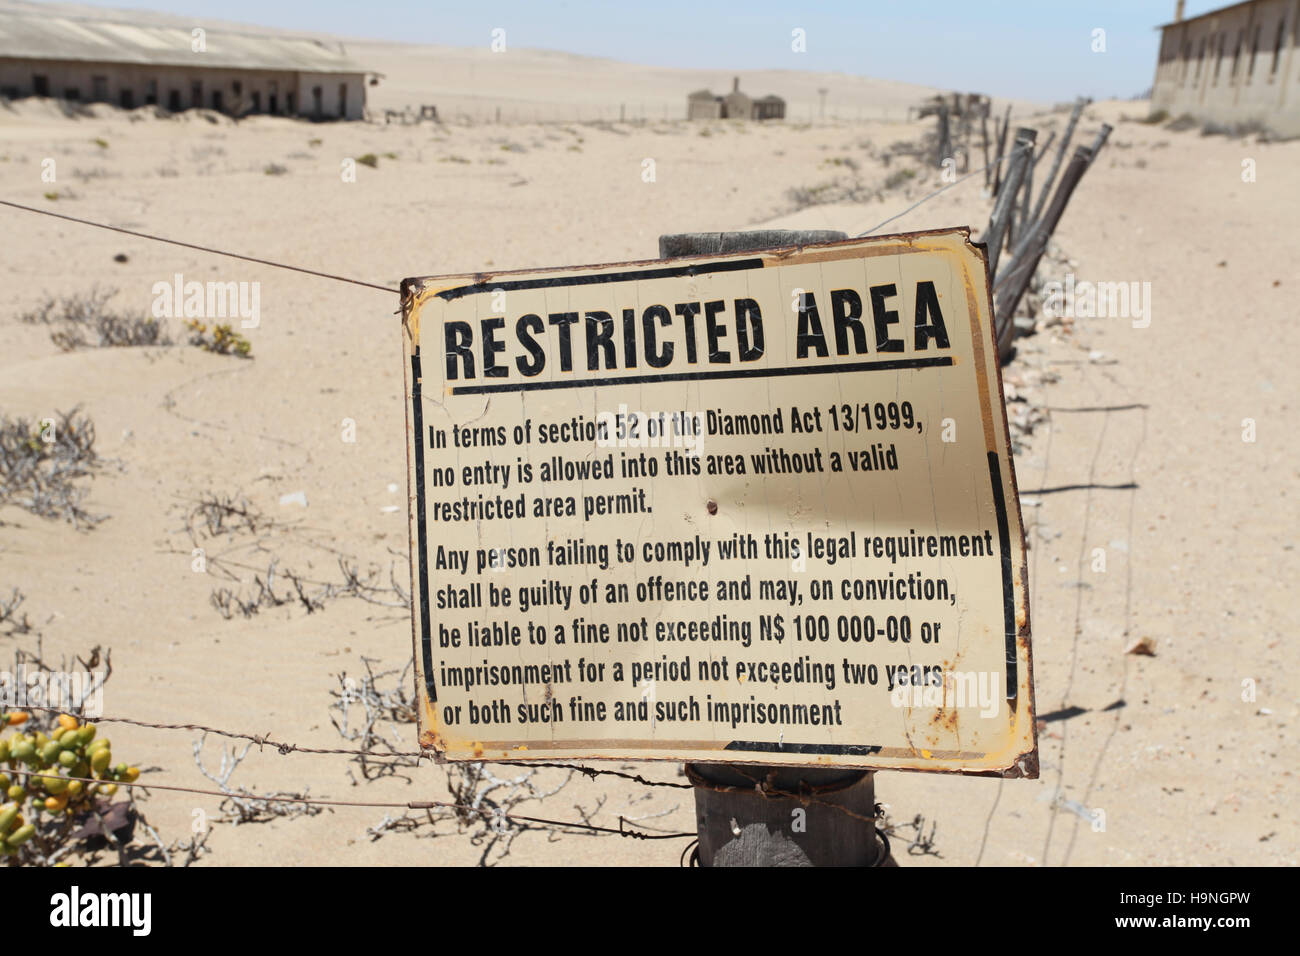 Restricted area sign at the Sperrgebiet diamond mine in Namibia where tourists visit the ghost town of Kolmanskop Stock Photo